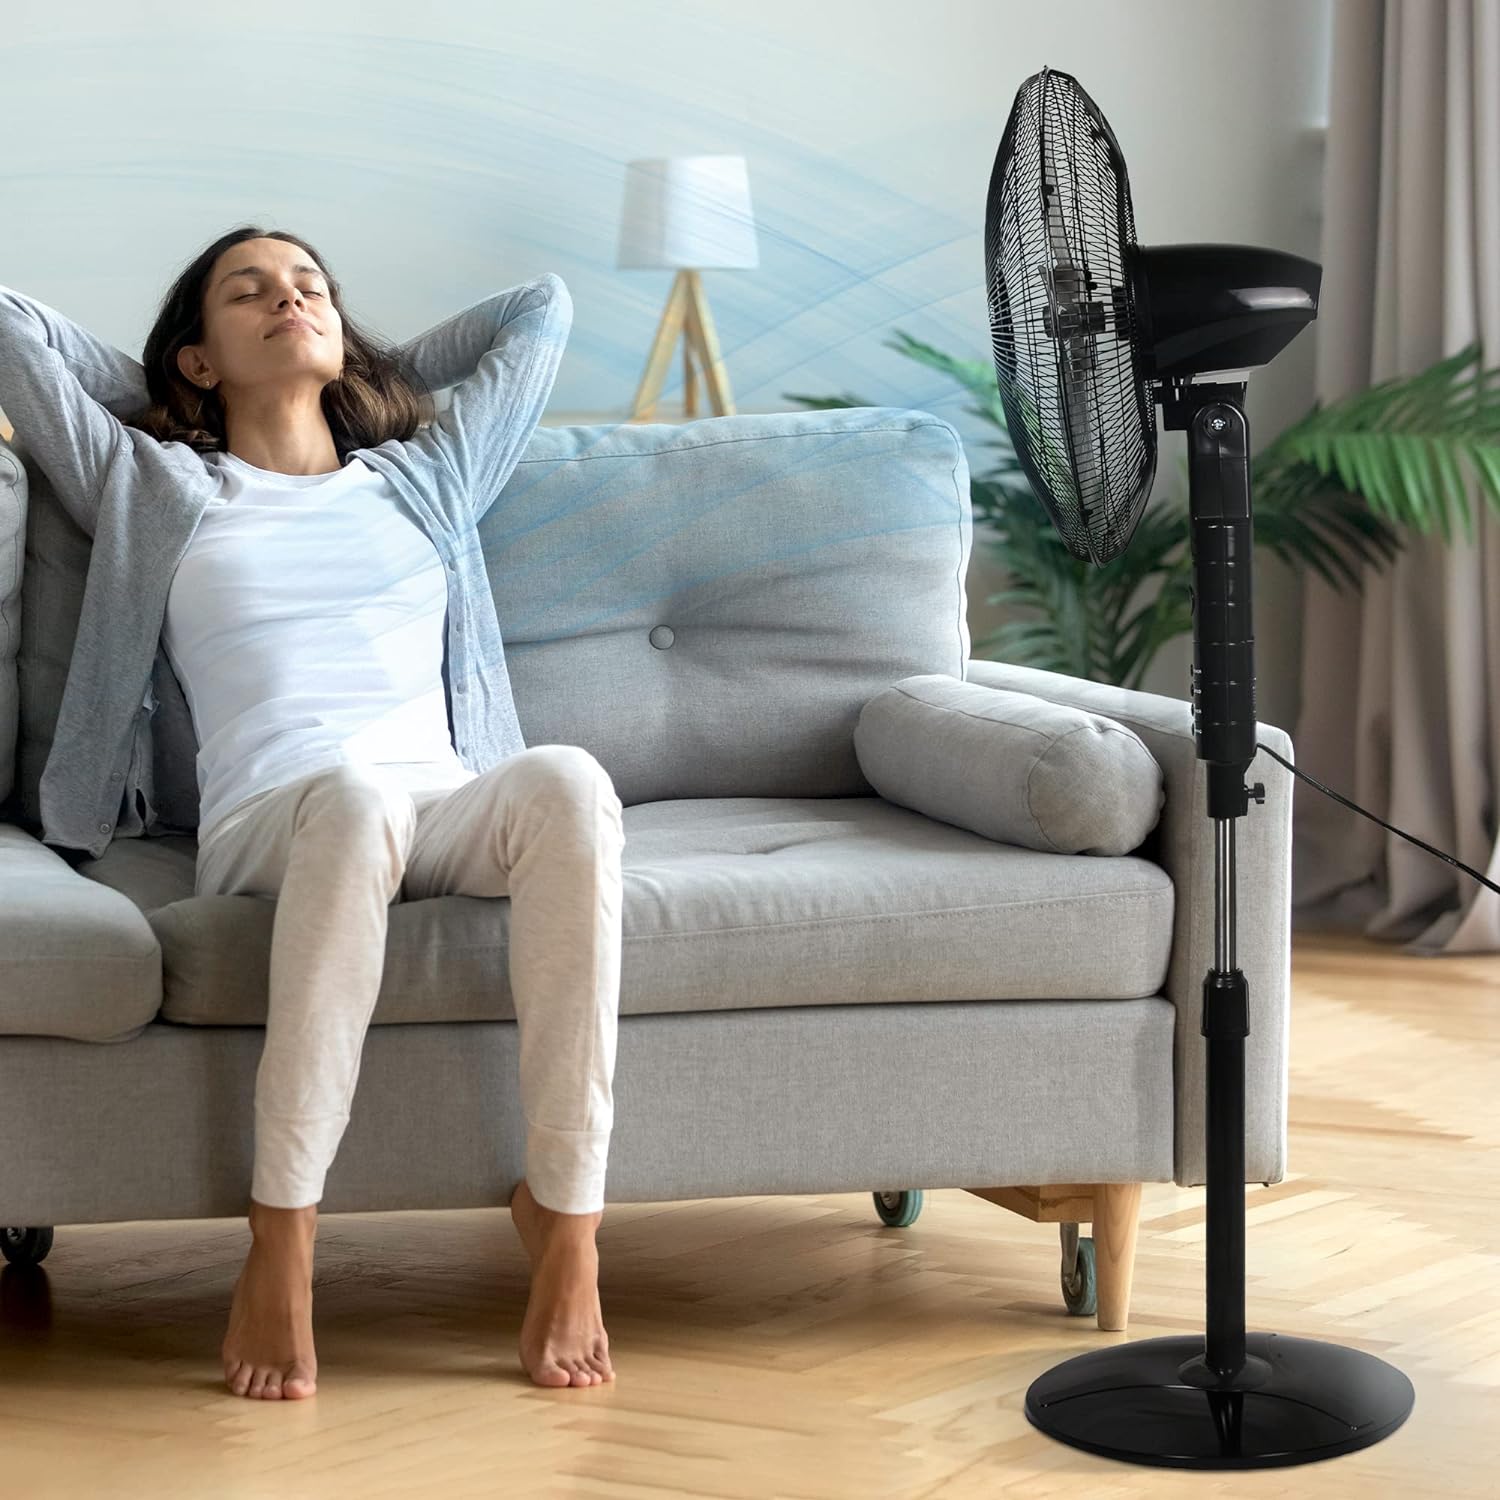 KEPLIN Pedestal Fan with Turbo Wind and Remote Control - 60W, 3-Speed Settings, 7.5-Hour Timer, Oscillating, Adjustable Height and Tilt Head - Ideal fans for Home or Office